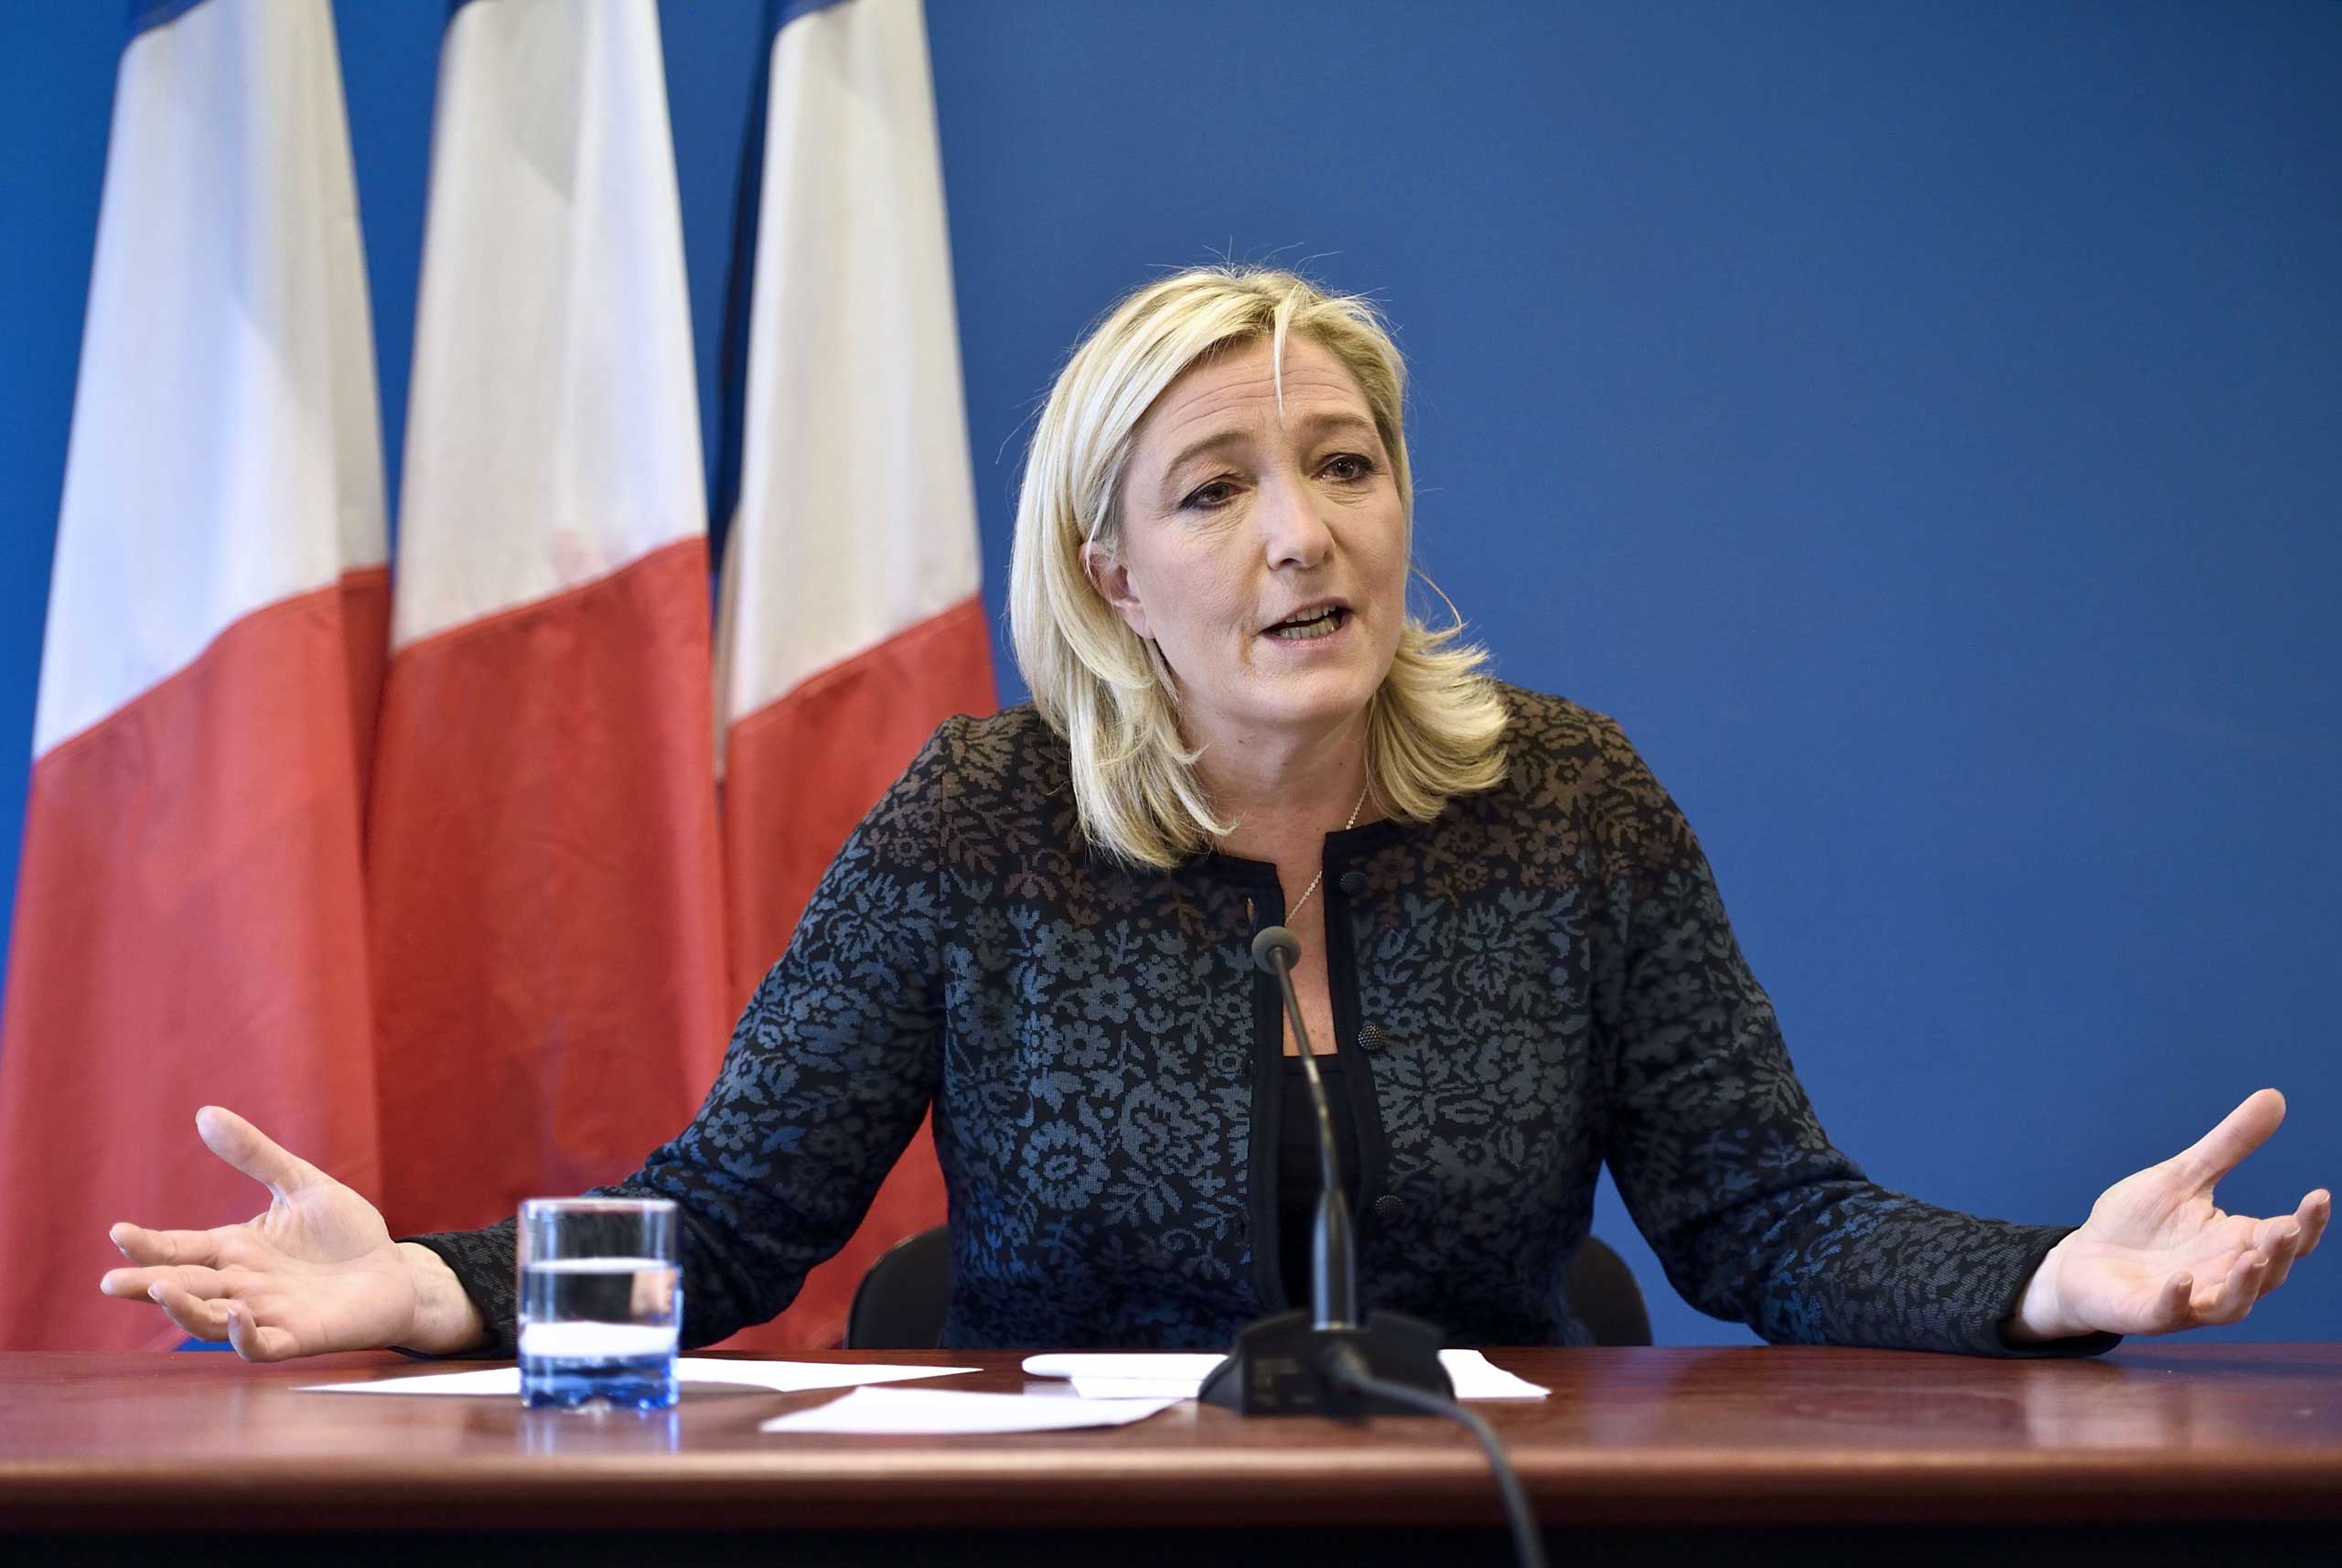 National Front president Marine Le Pen gives a press conference on Nov. 7, 2014 in Nanterre, near Paris. (Eric Feferberg—AFP/Getty Images)